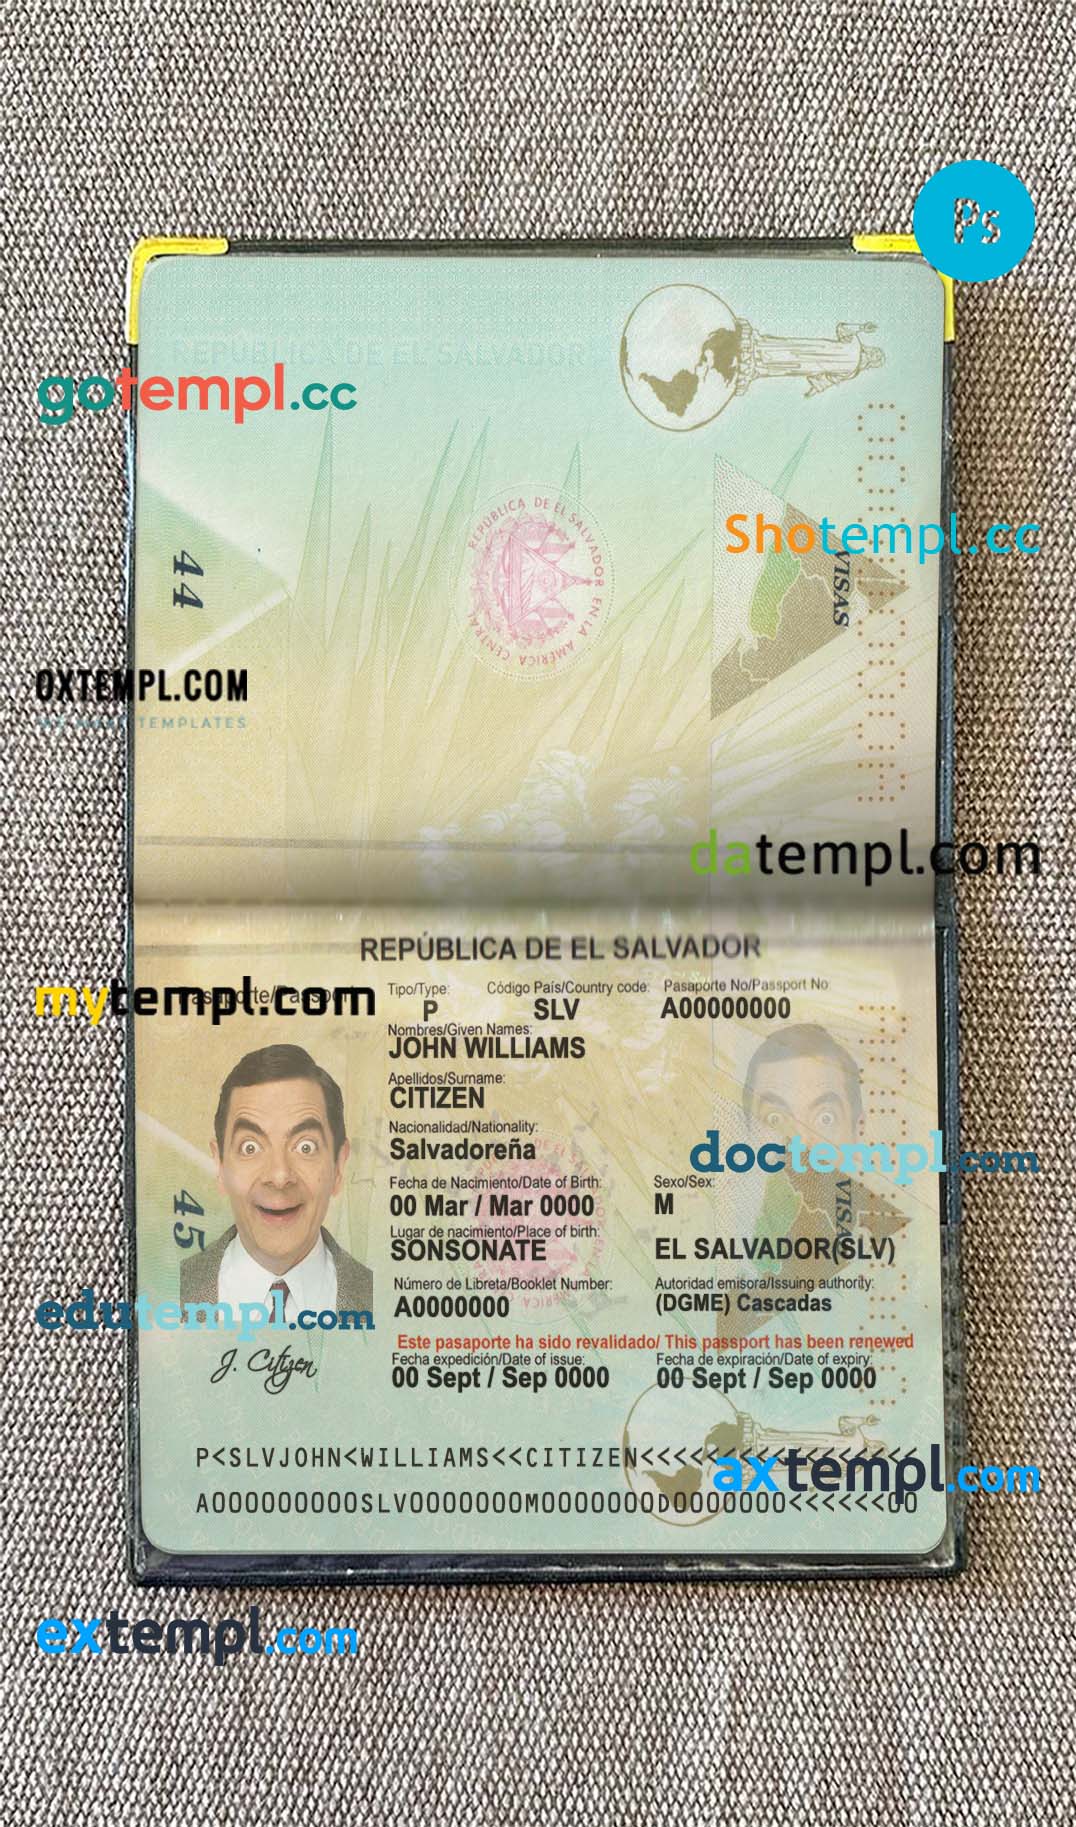 Dominican Republic passport psd files, editable scan and snapshot sample, 2 in 1